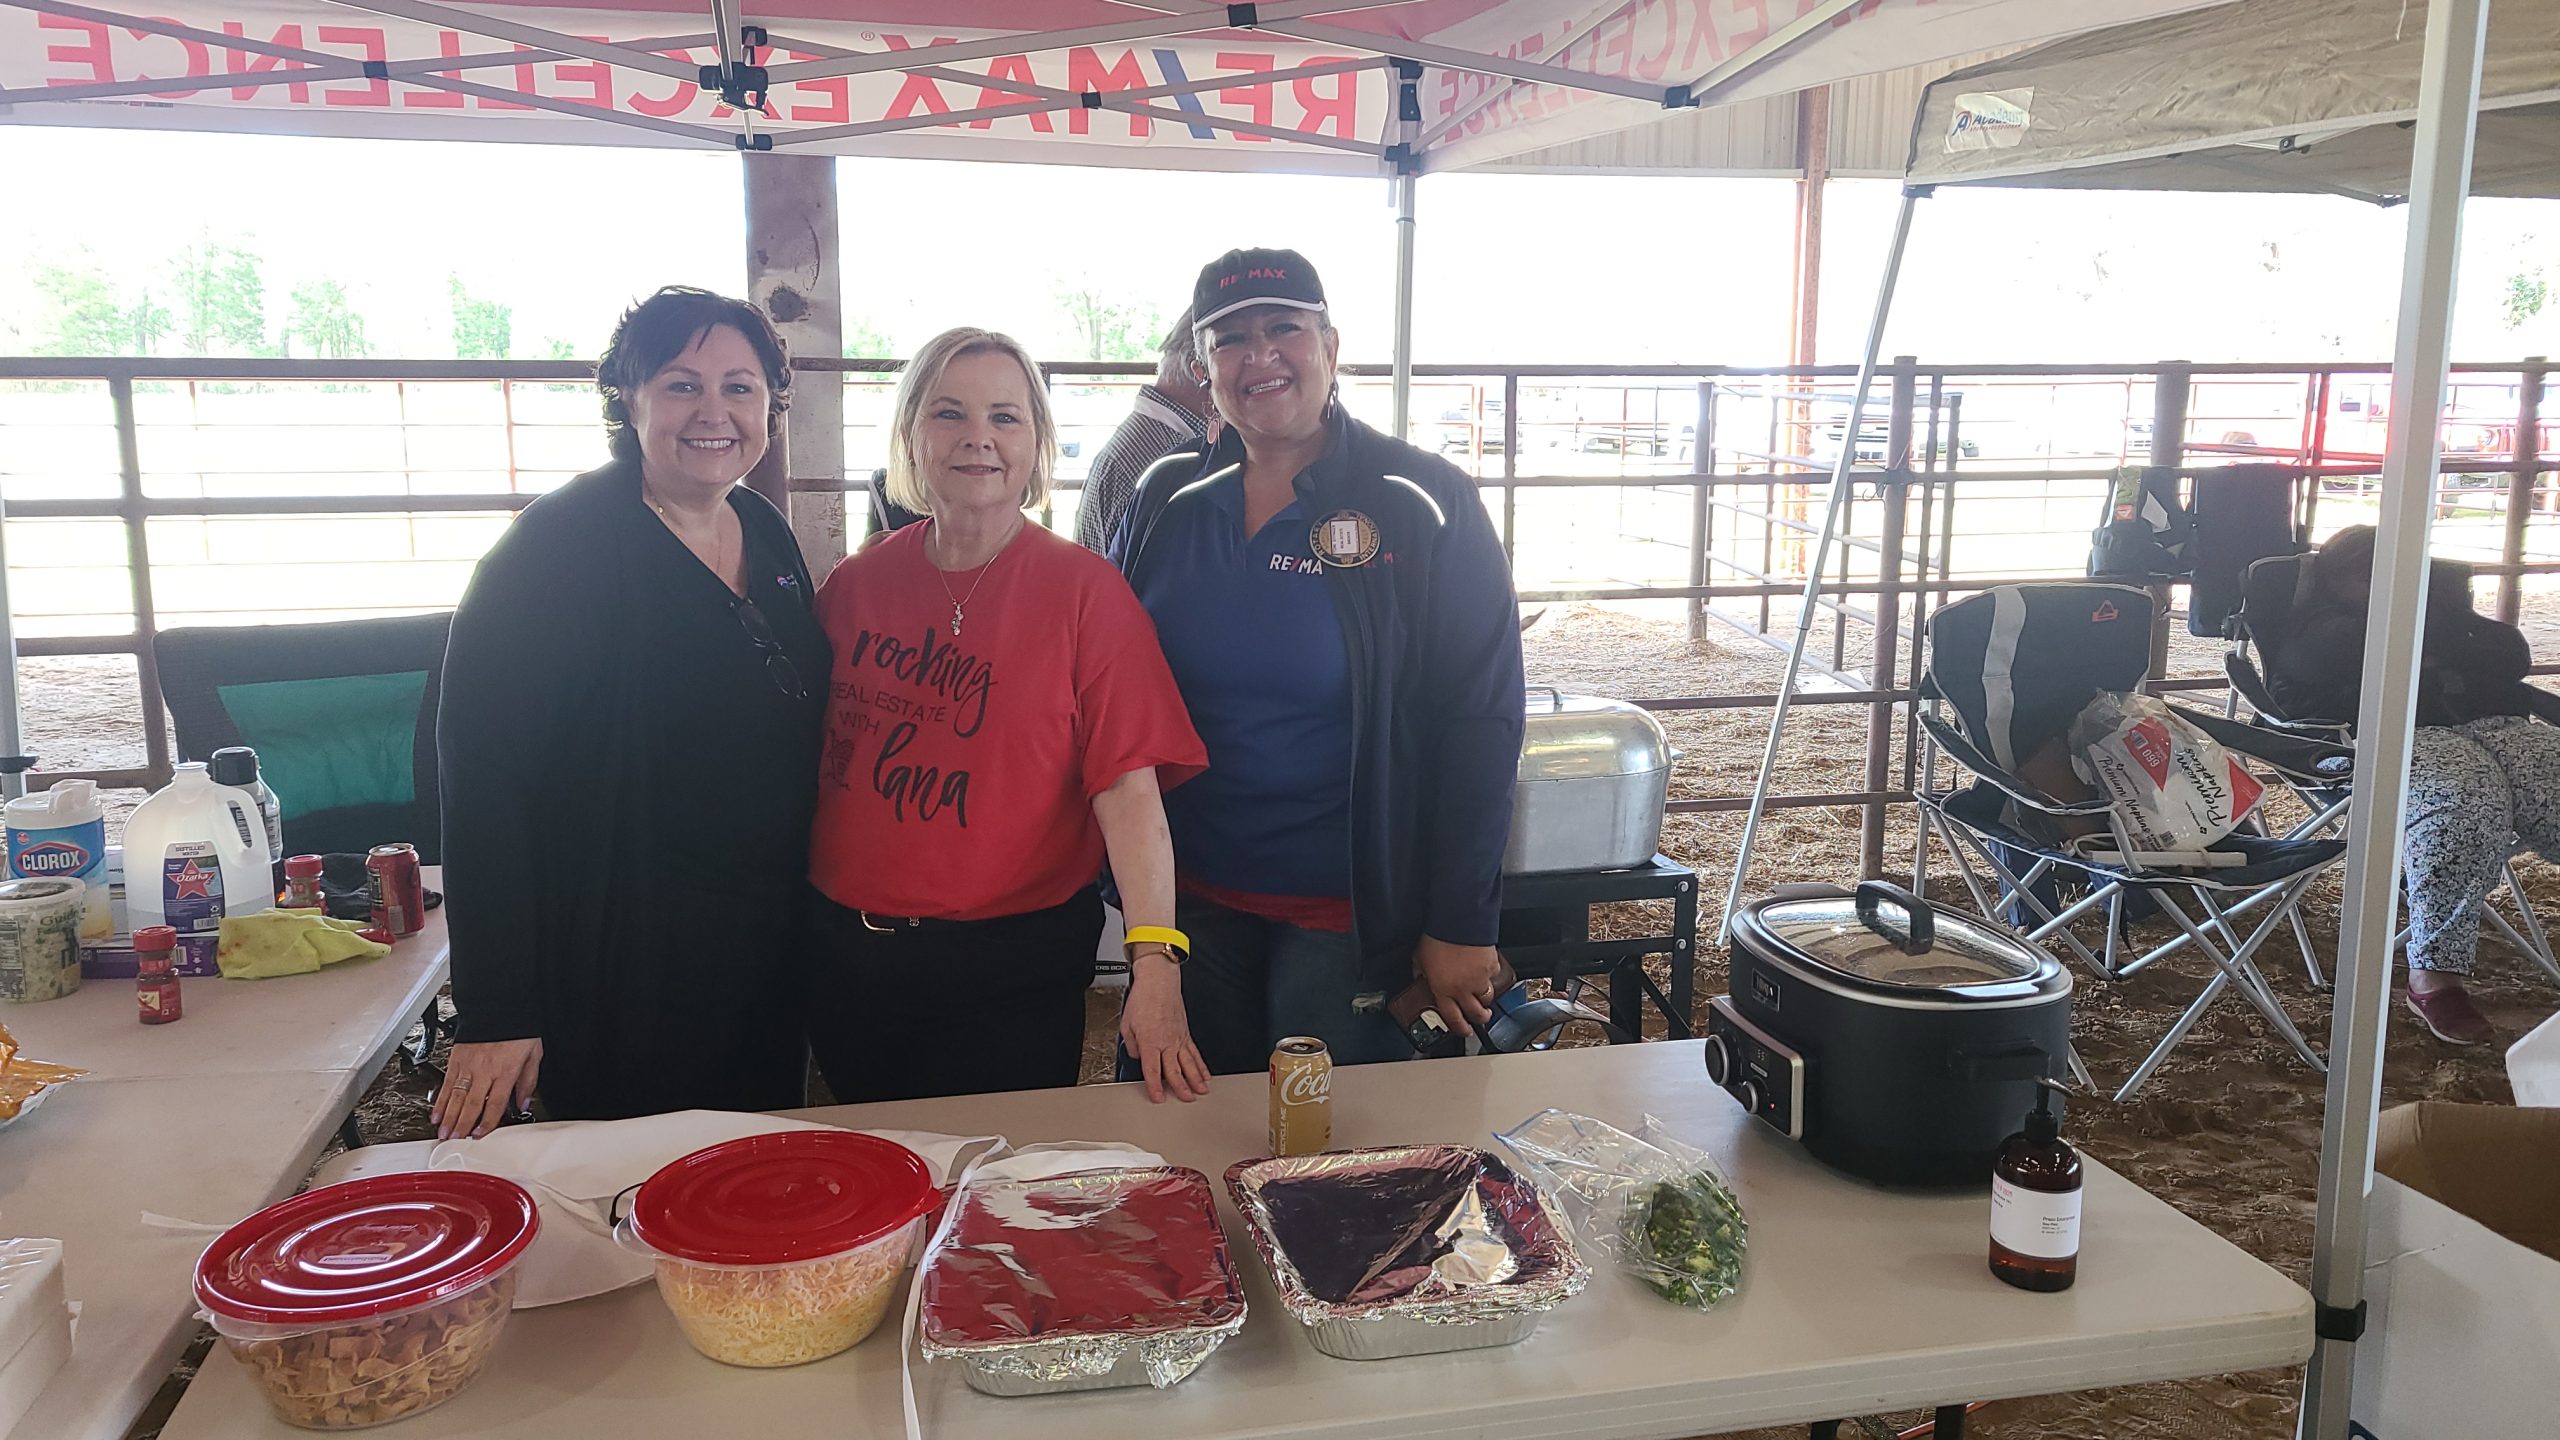 Rotary Club Chili Cook-off